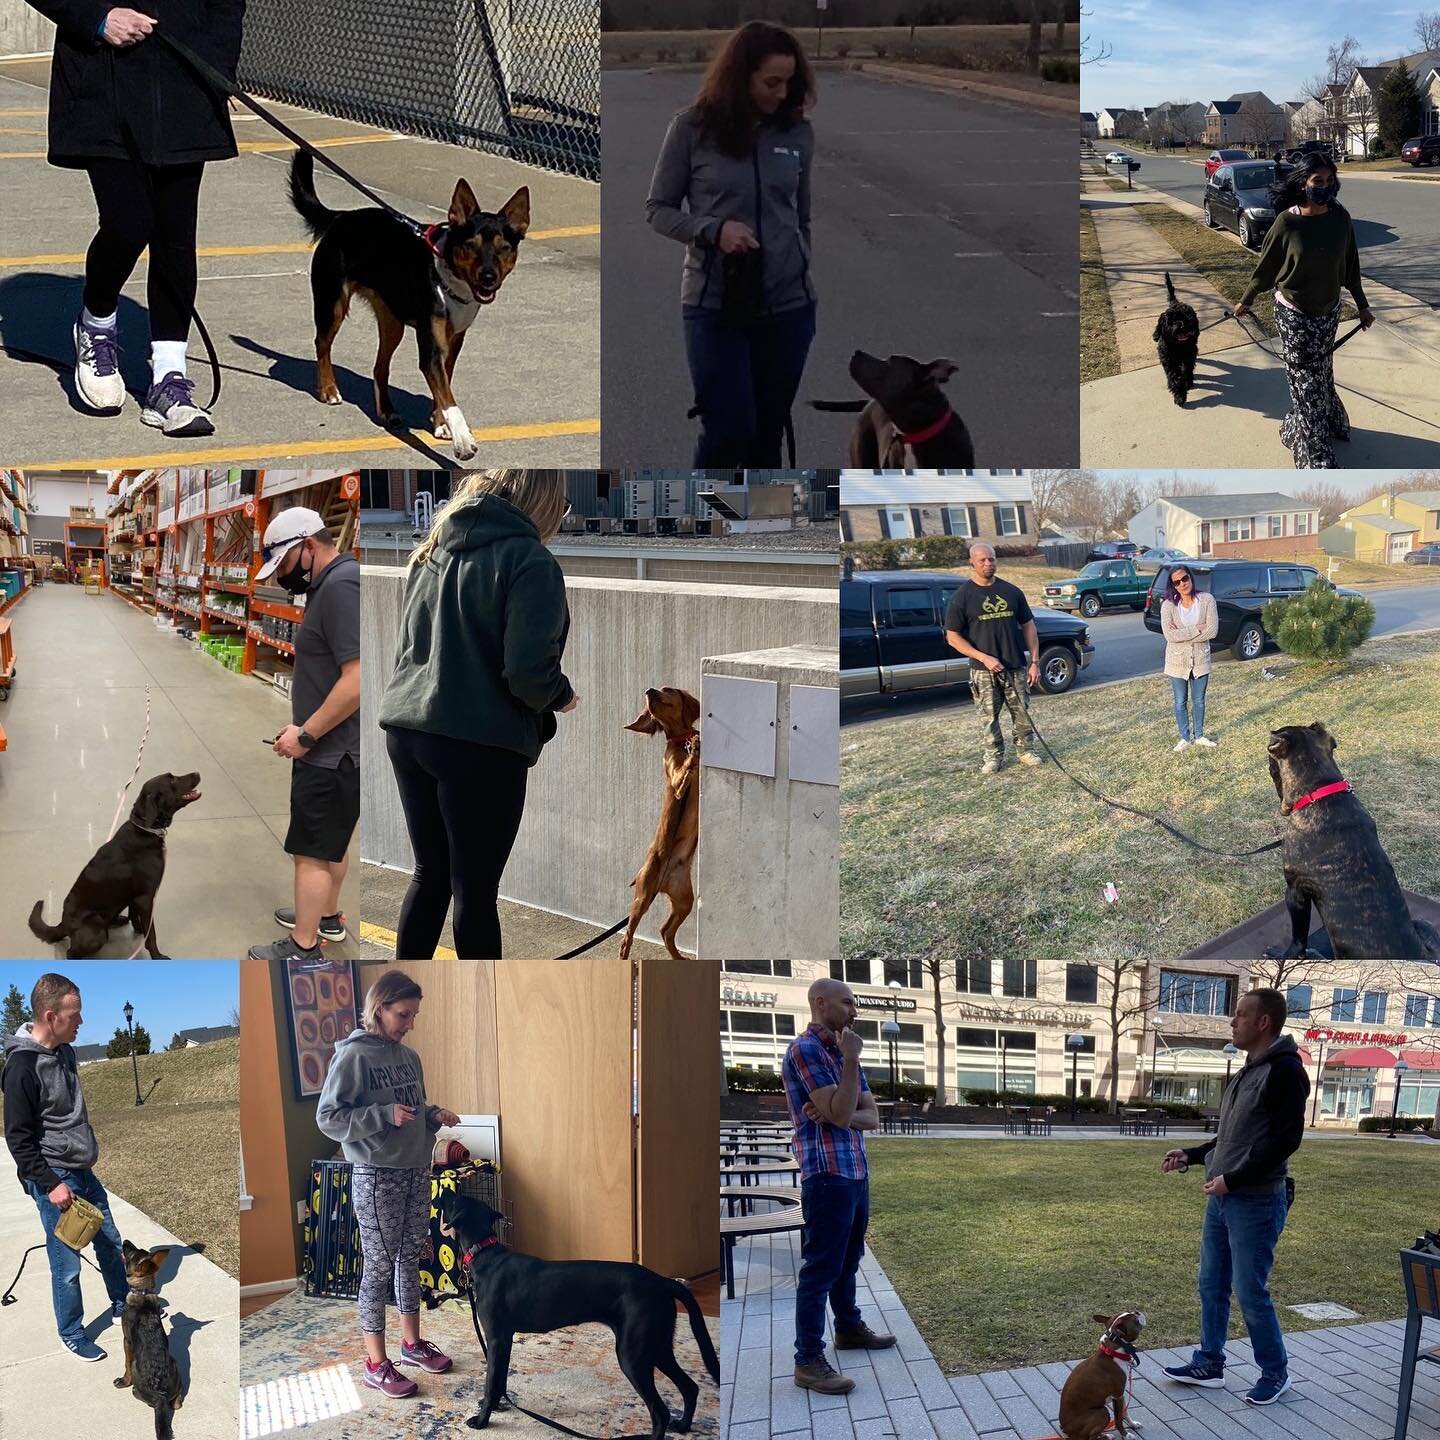 Edge K9: Building dogs &bull; Coaching owners &bull; 1 leash at a time 

A quick glance back at some of the awesome dogs and owners I got the pleasure of working with this week.  Some new to the Edge Community and familiar faces. 

Great week of trai